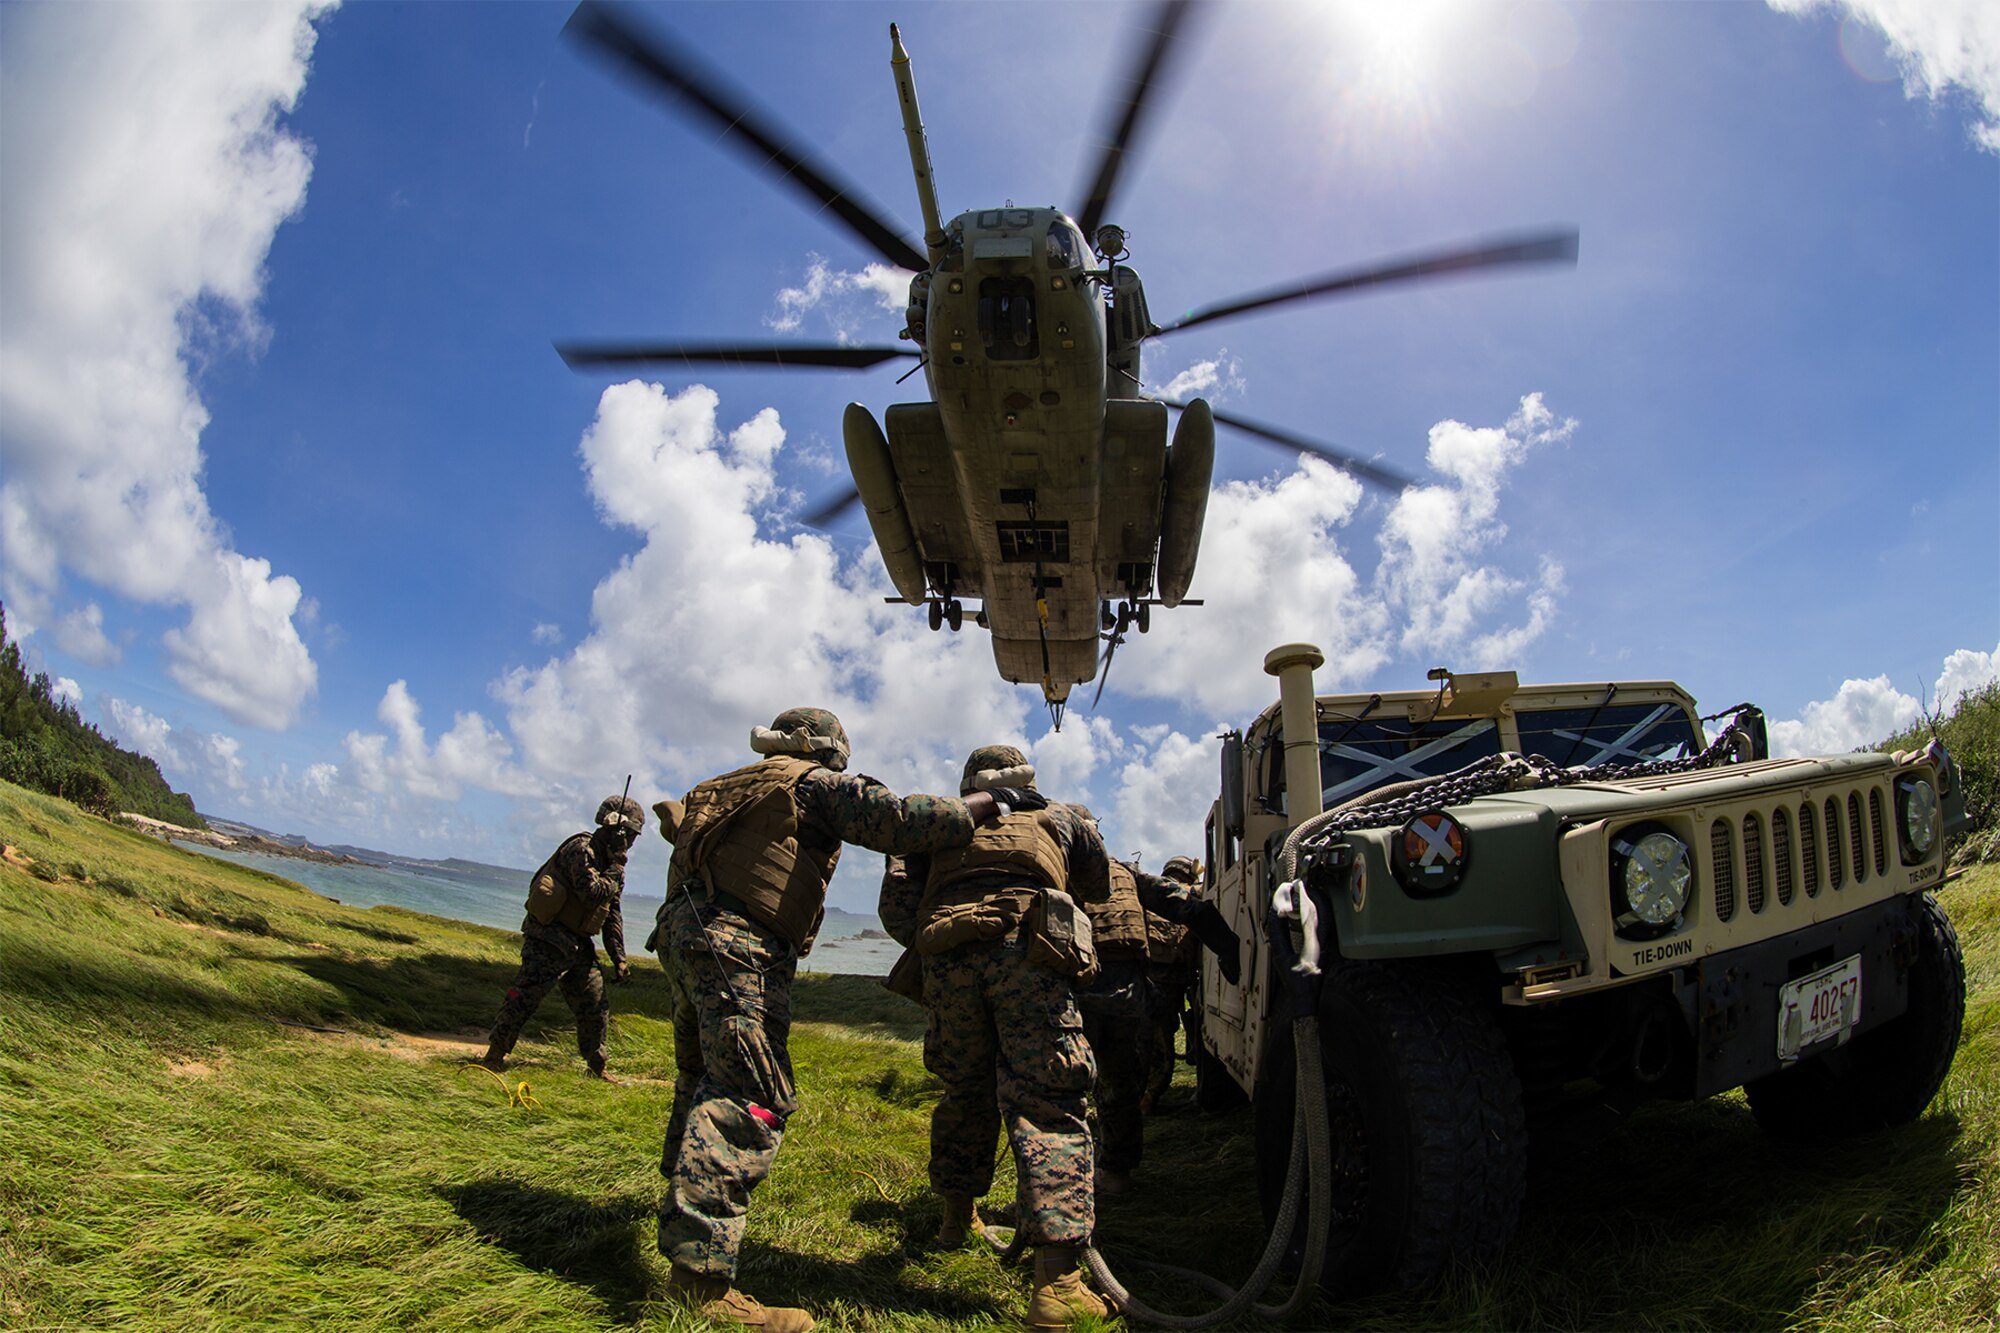 Marines stand by a vehicle under a helicopter.